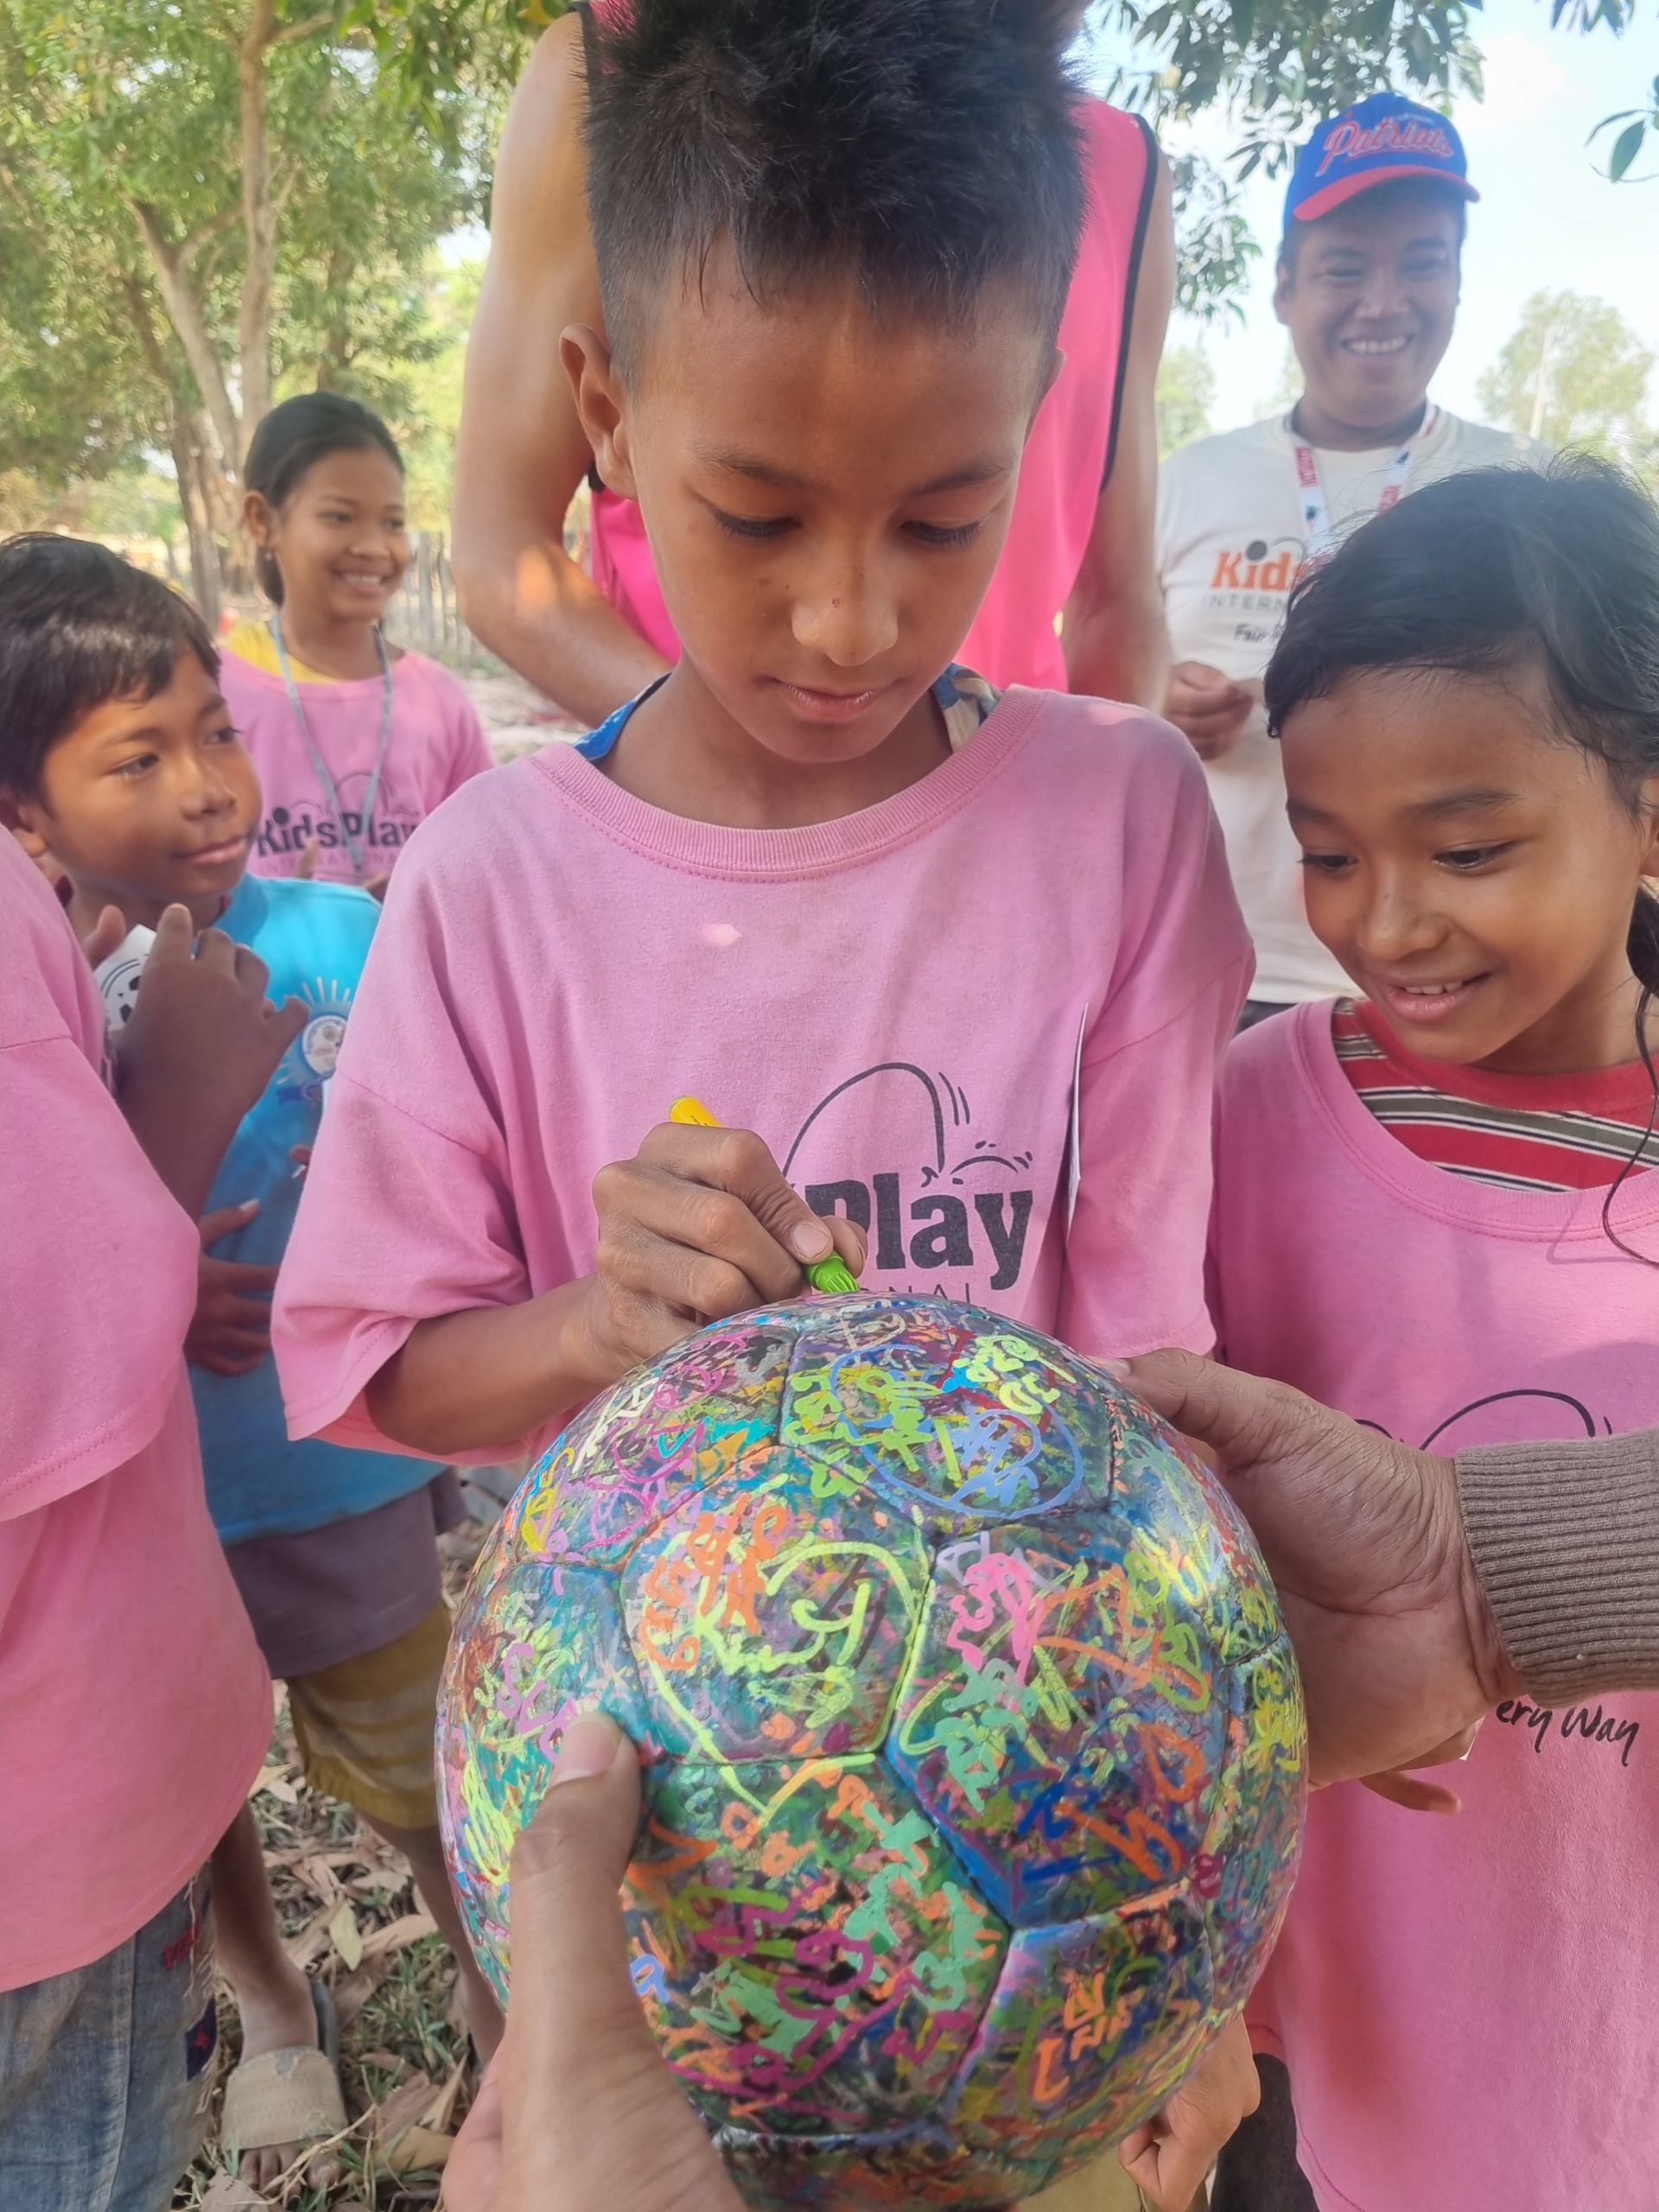 Child signs The Ball at Kids Play International, Cambodia